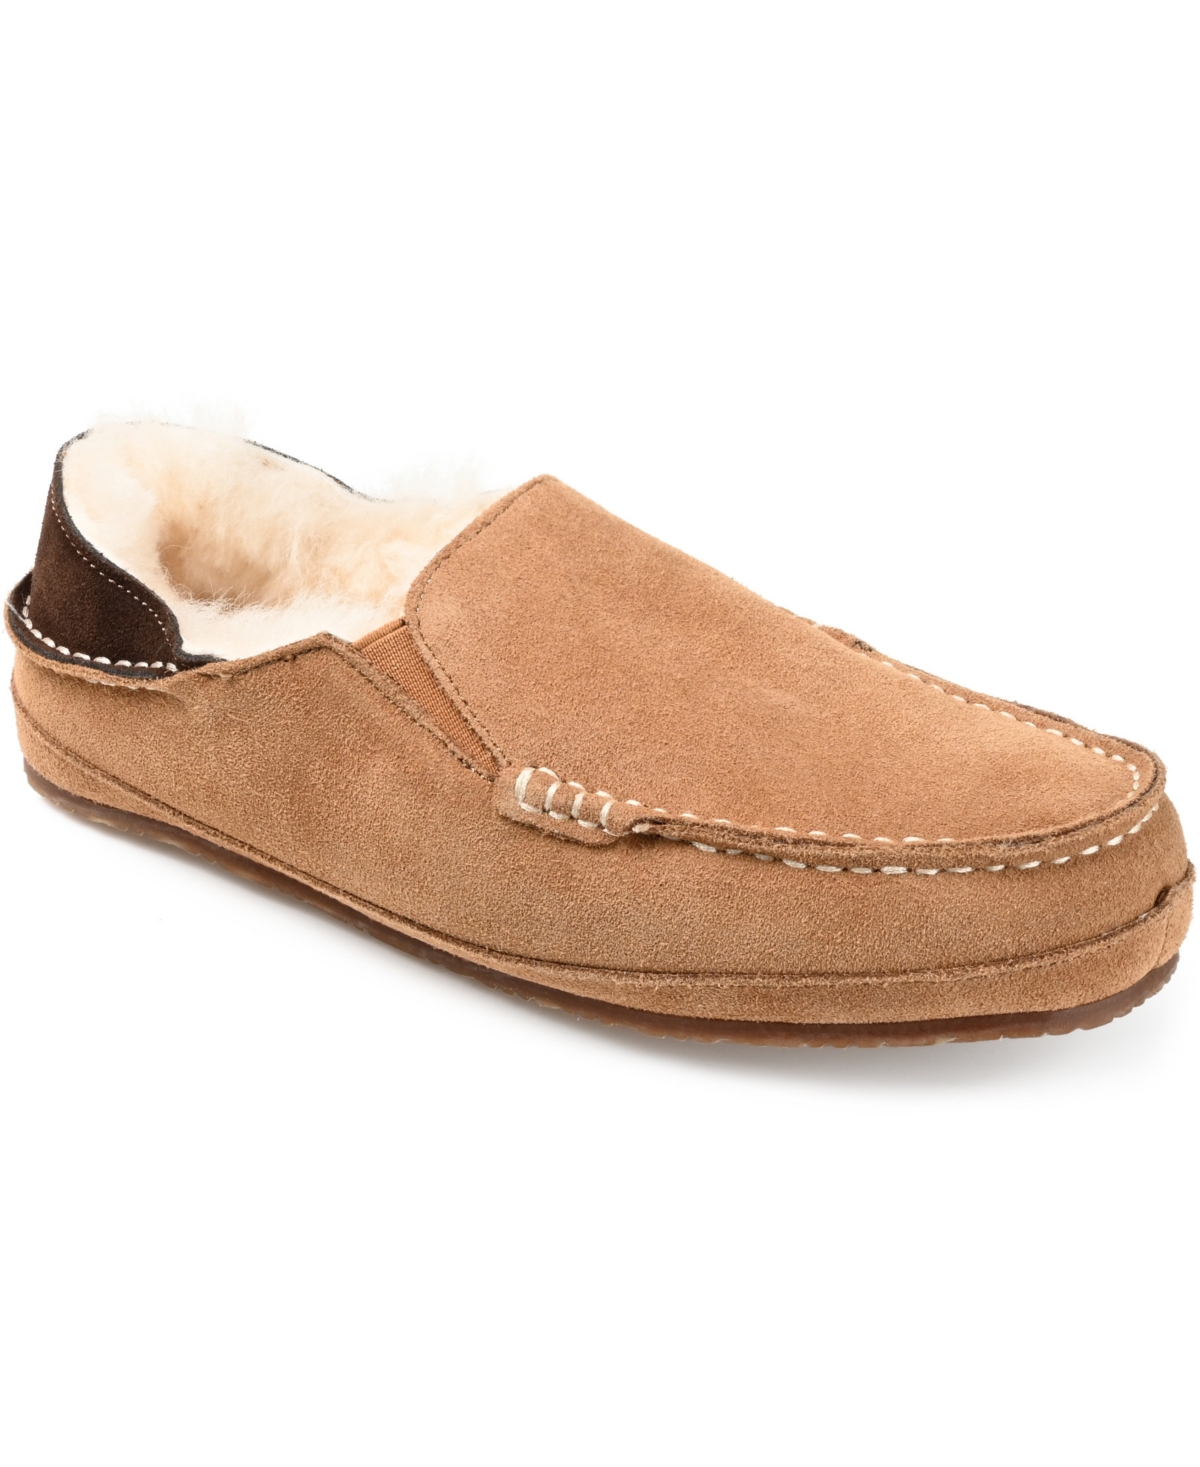 Men's Solace Fold-down Heel Moccasin Slippers - Tan